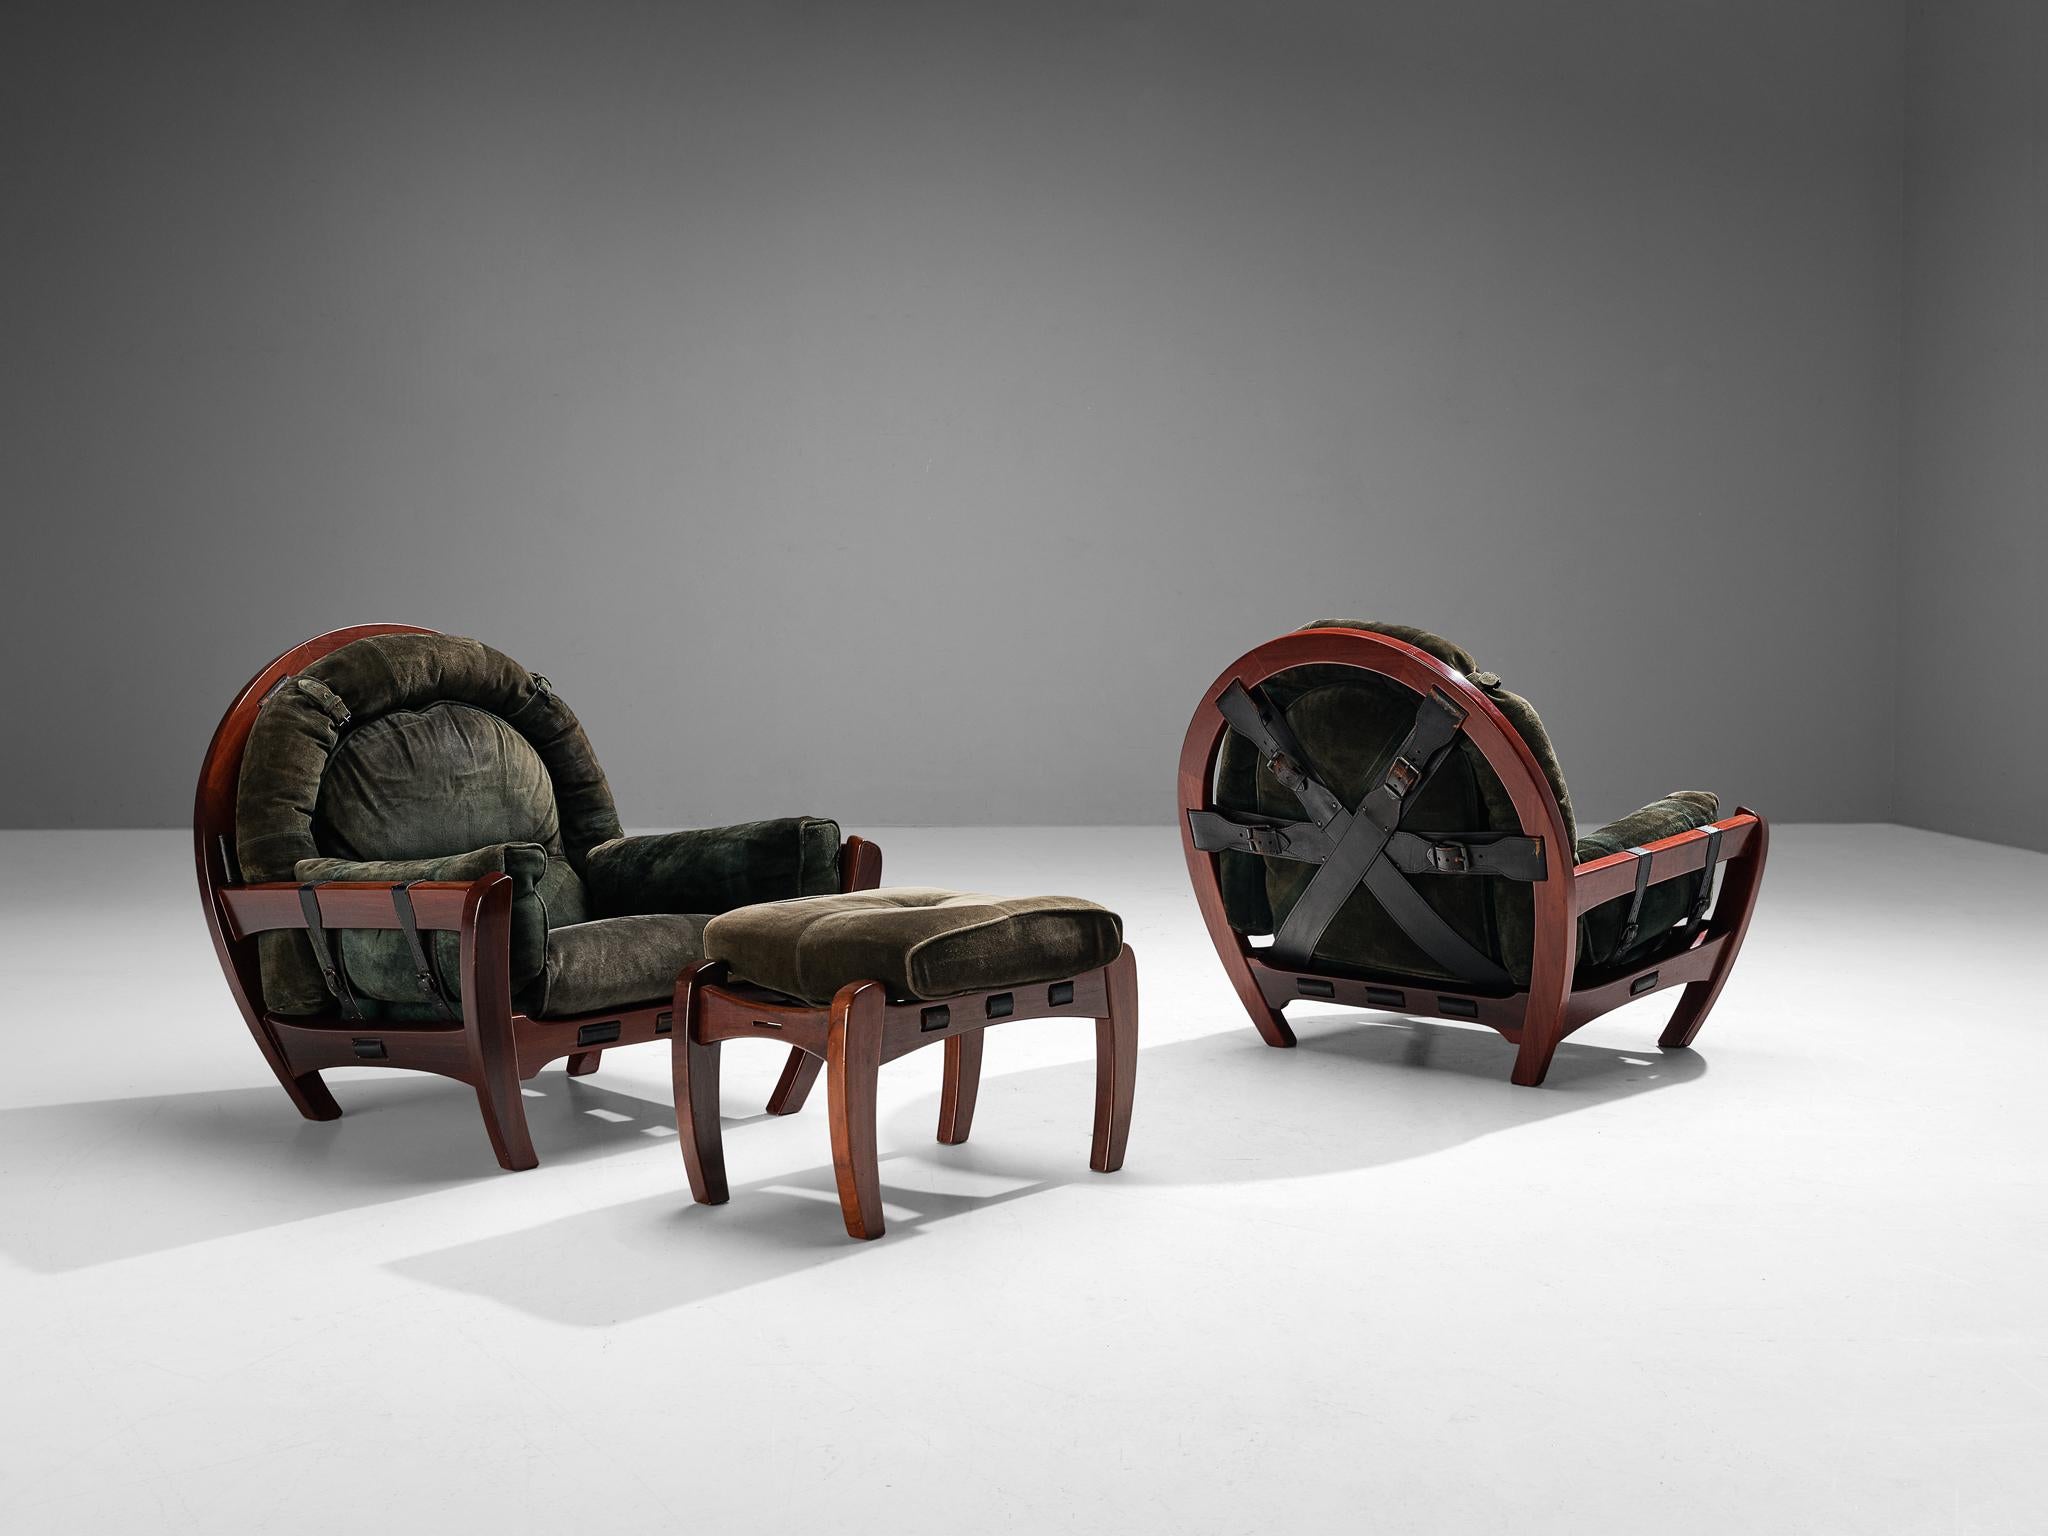 Luciano Frigerio, pair of 'Rancero' armchairs and ottoman, mahogany, velvet, leather, Italy, 1970s

Pair of monumental and extremely inviting lounge chair and matching ottoman. These items are designed by the Italian Luciano Frigerio in the 1970s.